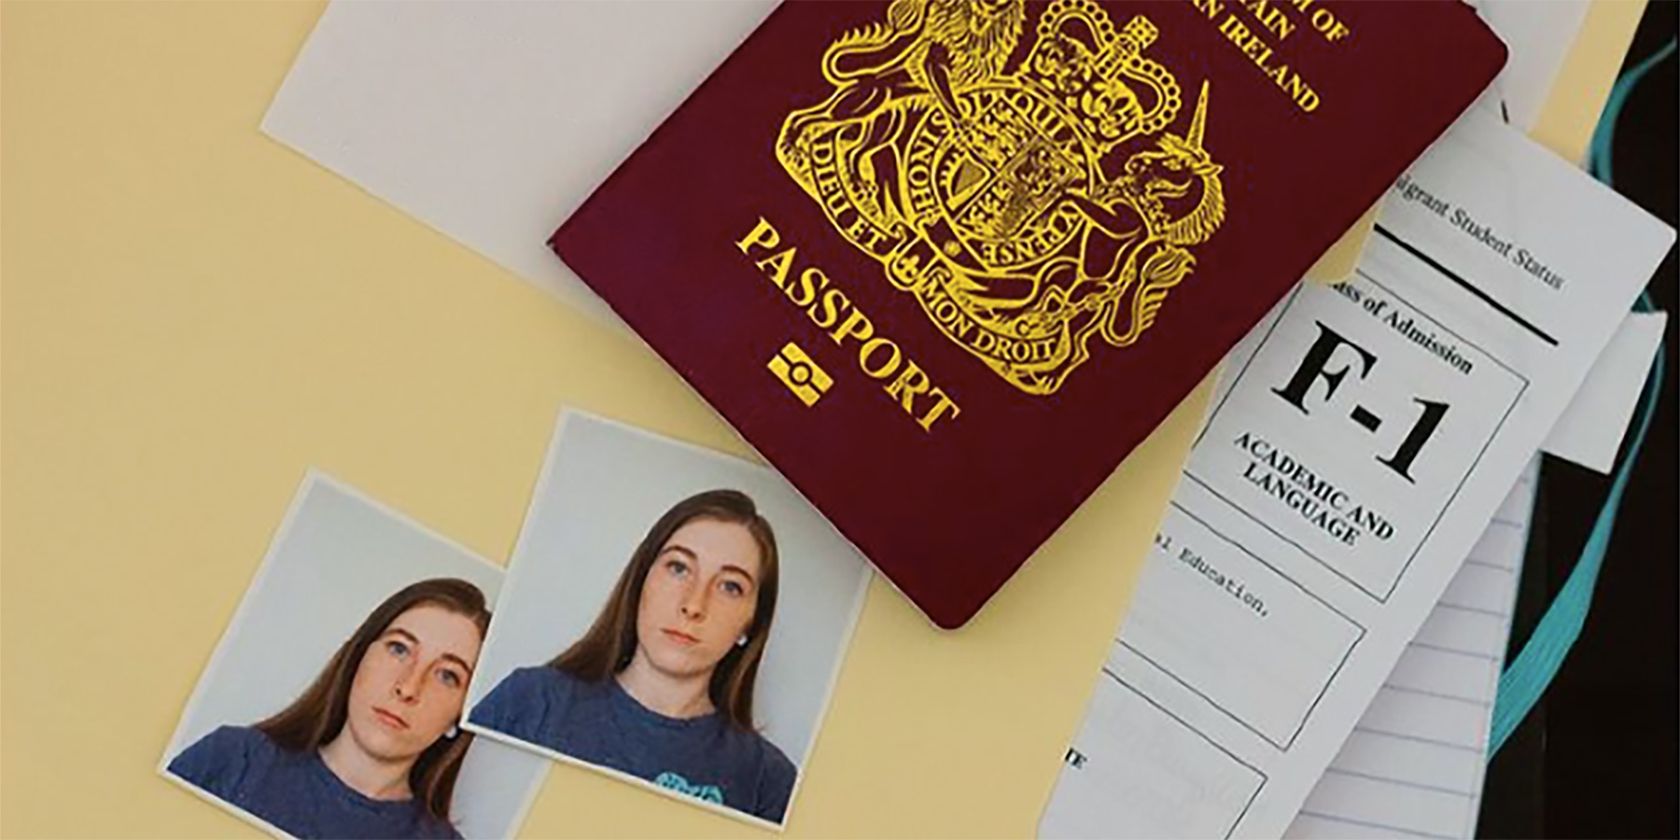 British passport with two printed photos of woman next to it.